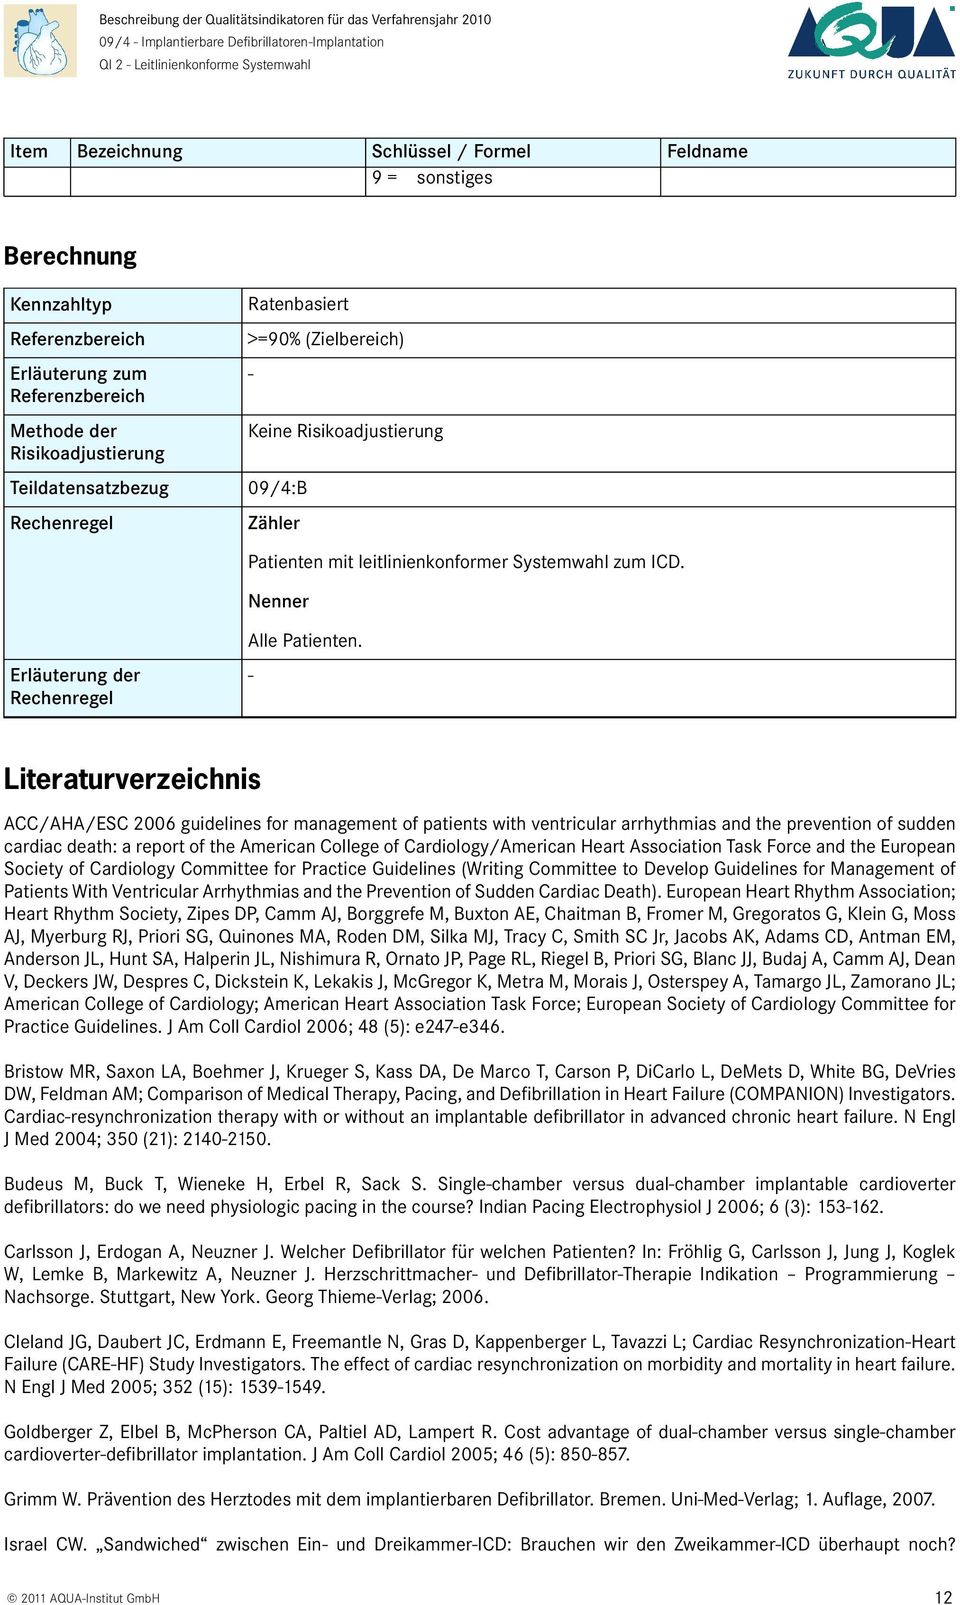 Erläuterung der Literaturverzeichnis ACC/AHA/ESC 2006 guidelines for management of patients with ventricular arrhythmias and the prevention of sudden cardiac death: a report of the American College